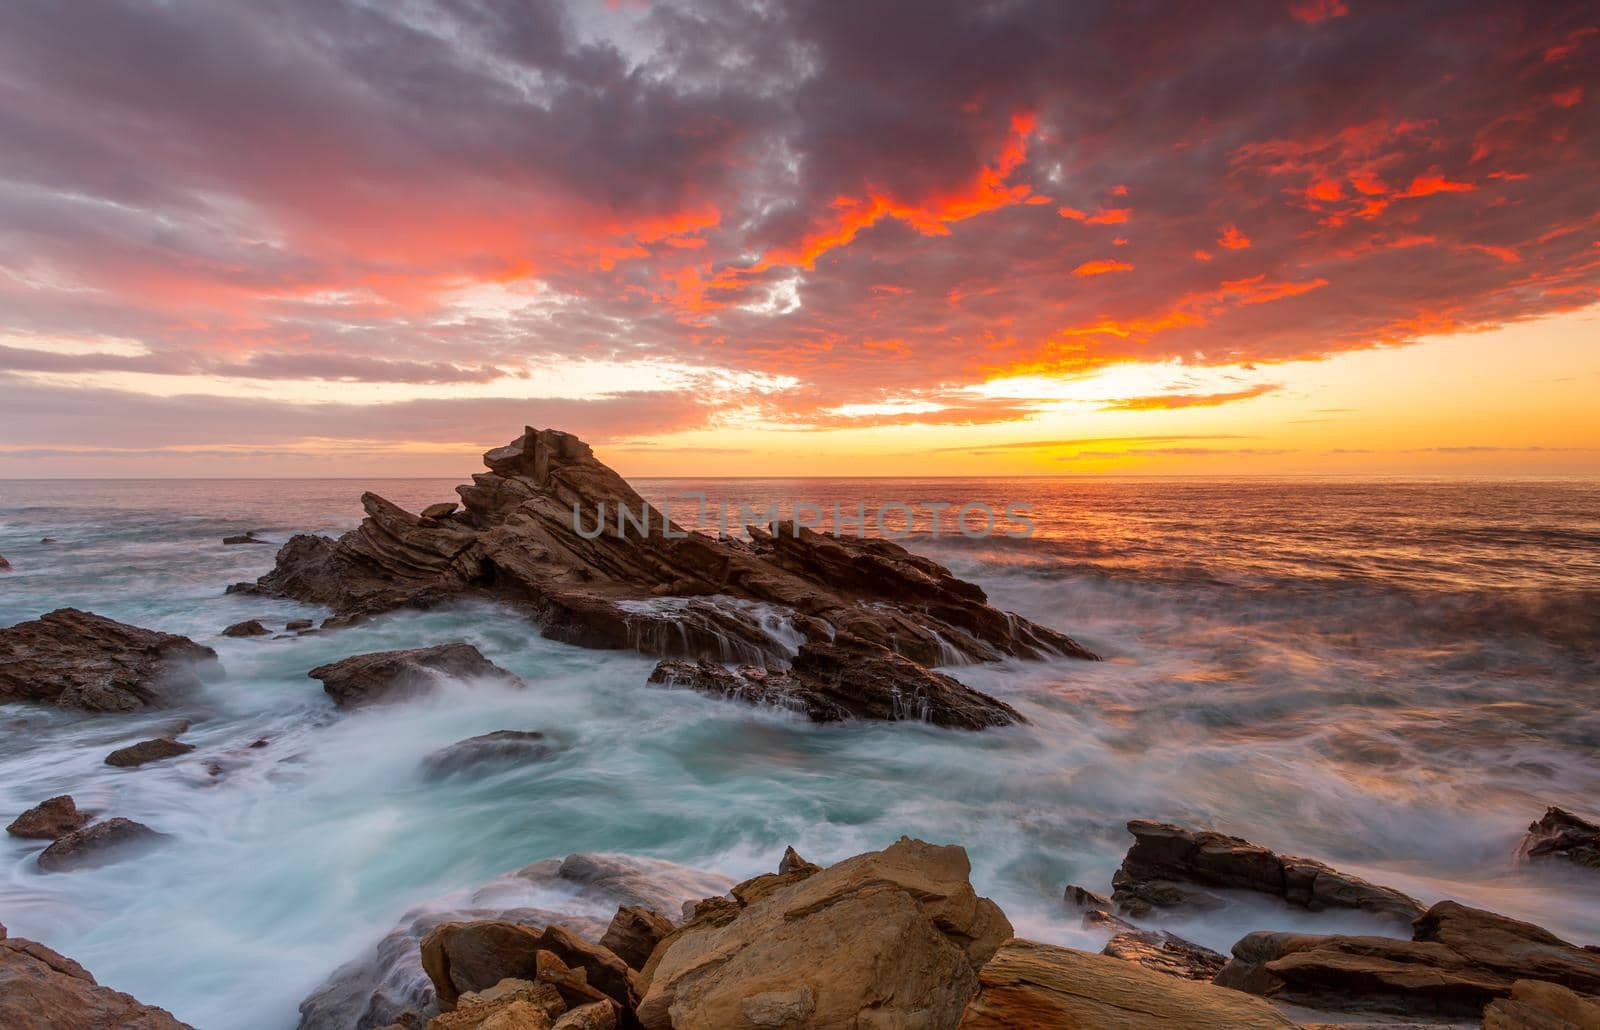 Sunrise over the ocean and rocky beach foreground by lovleah